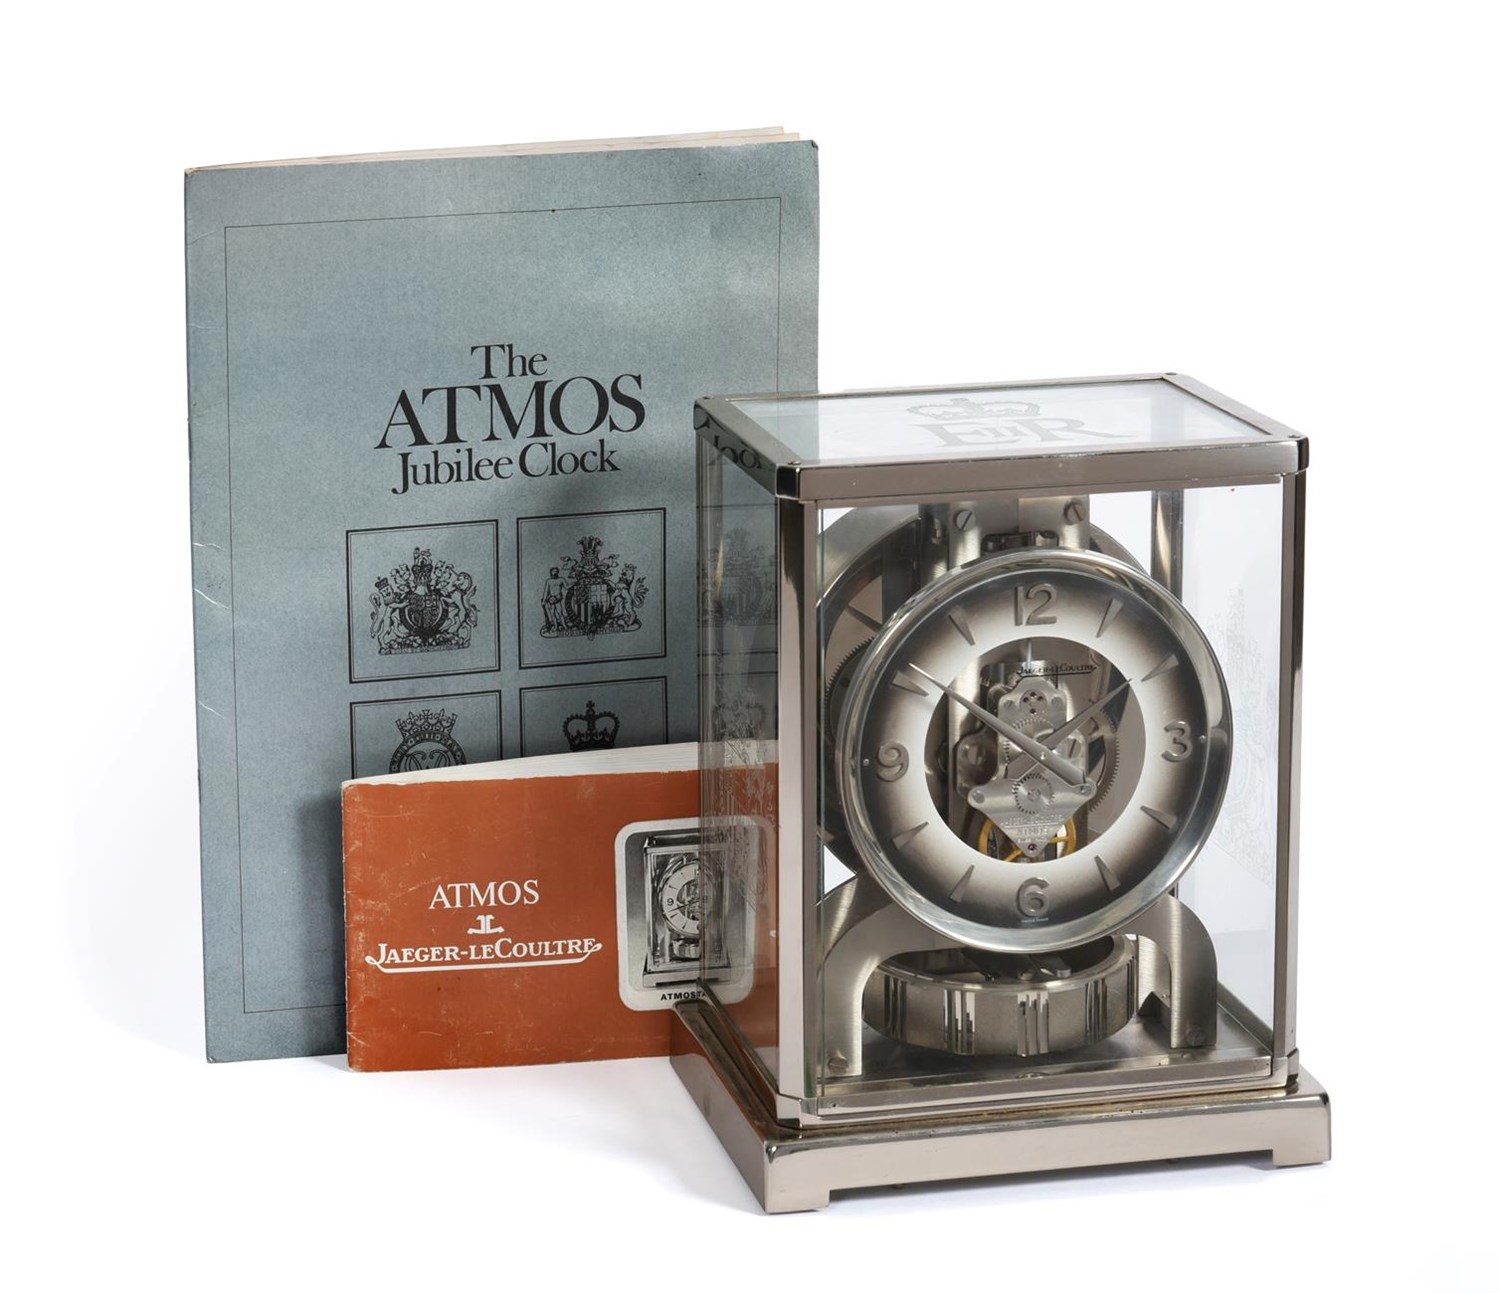 Lot 403 - A Limited Edition Atmos Clock to Celebrate Silver Jubilee of Her Majesty Queen Elizabeth II, signed